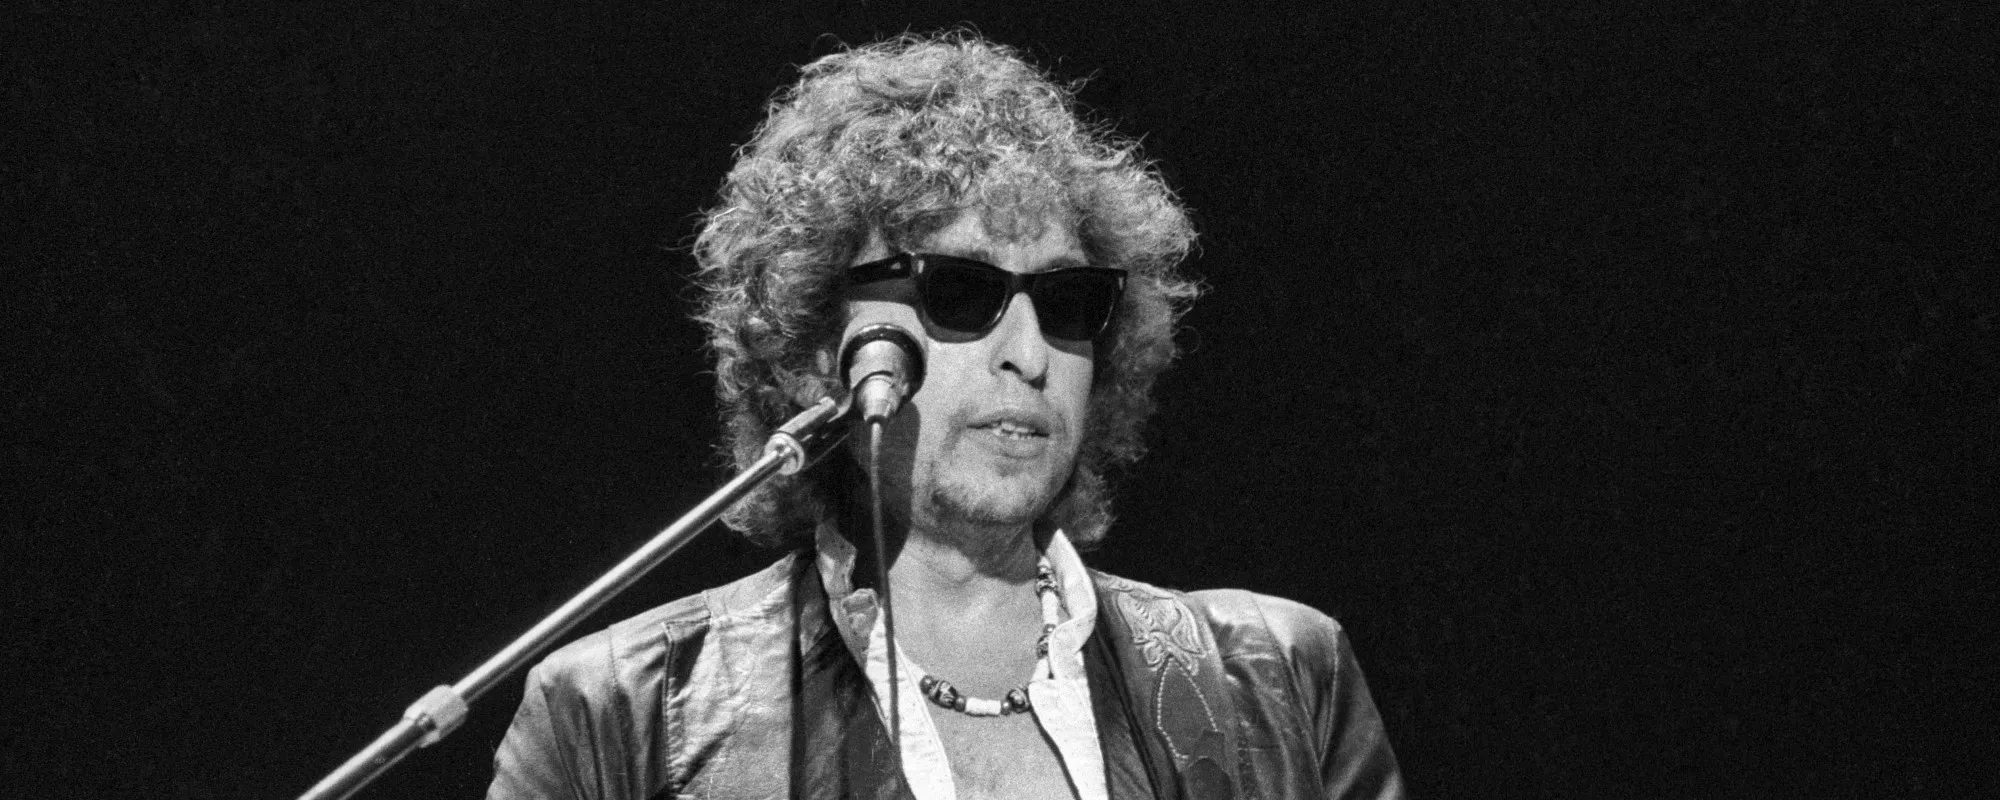 The Story Behind “Idiot Wind” by Bob Dylan and Why He Wanted It to Be Like a Painting